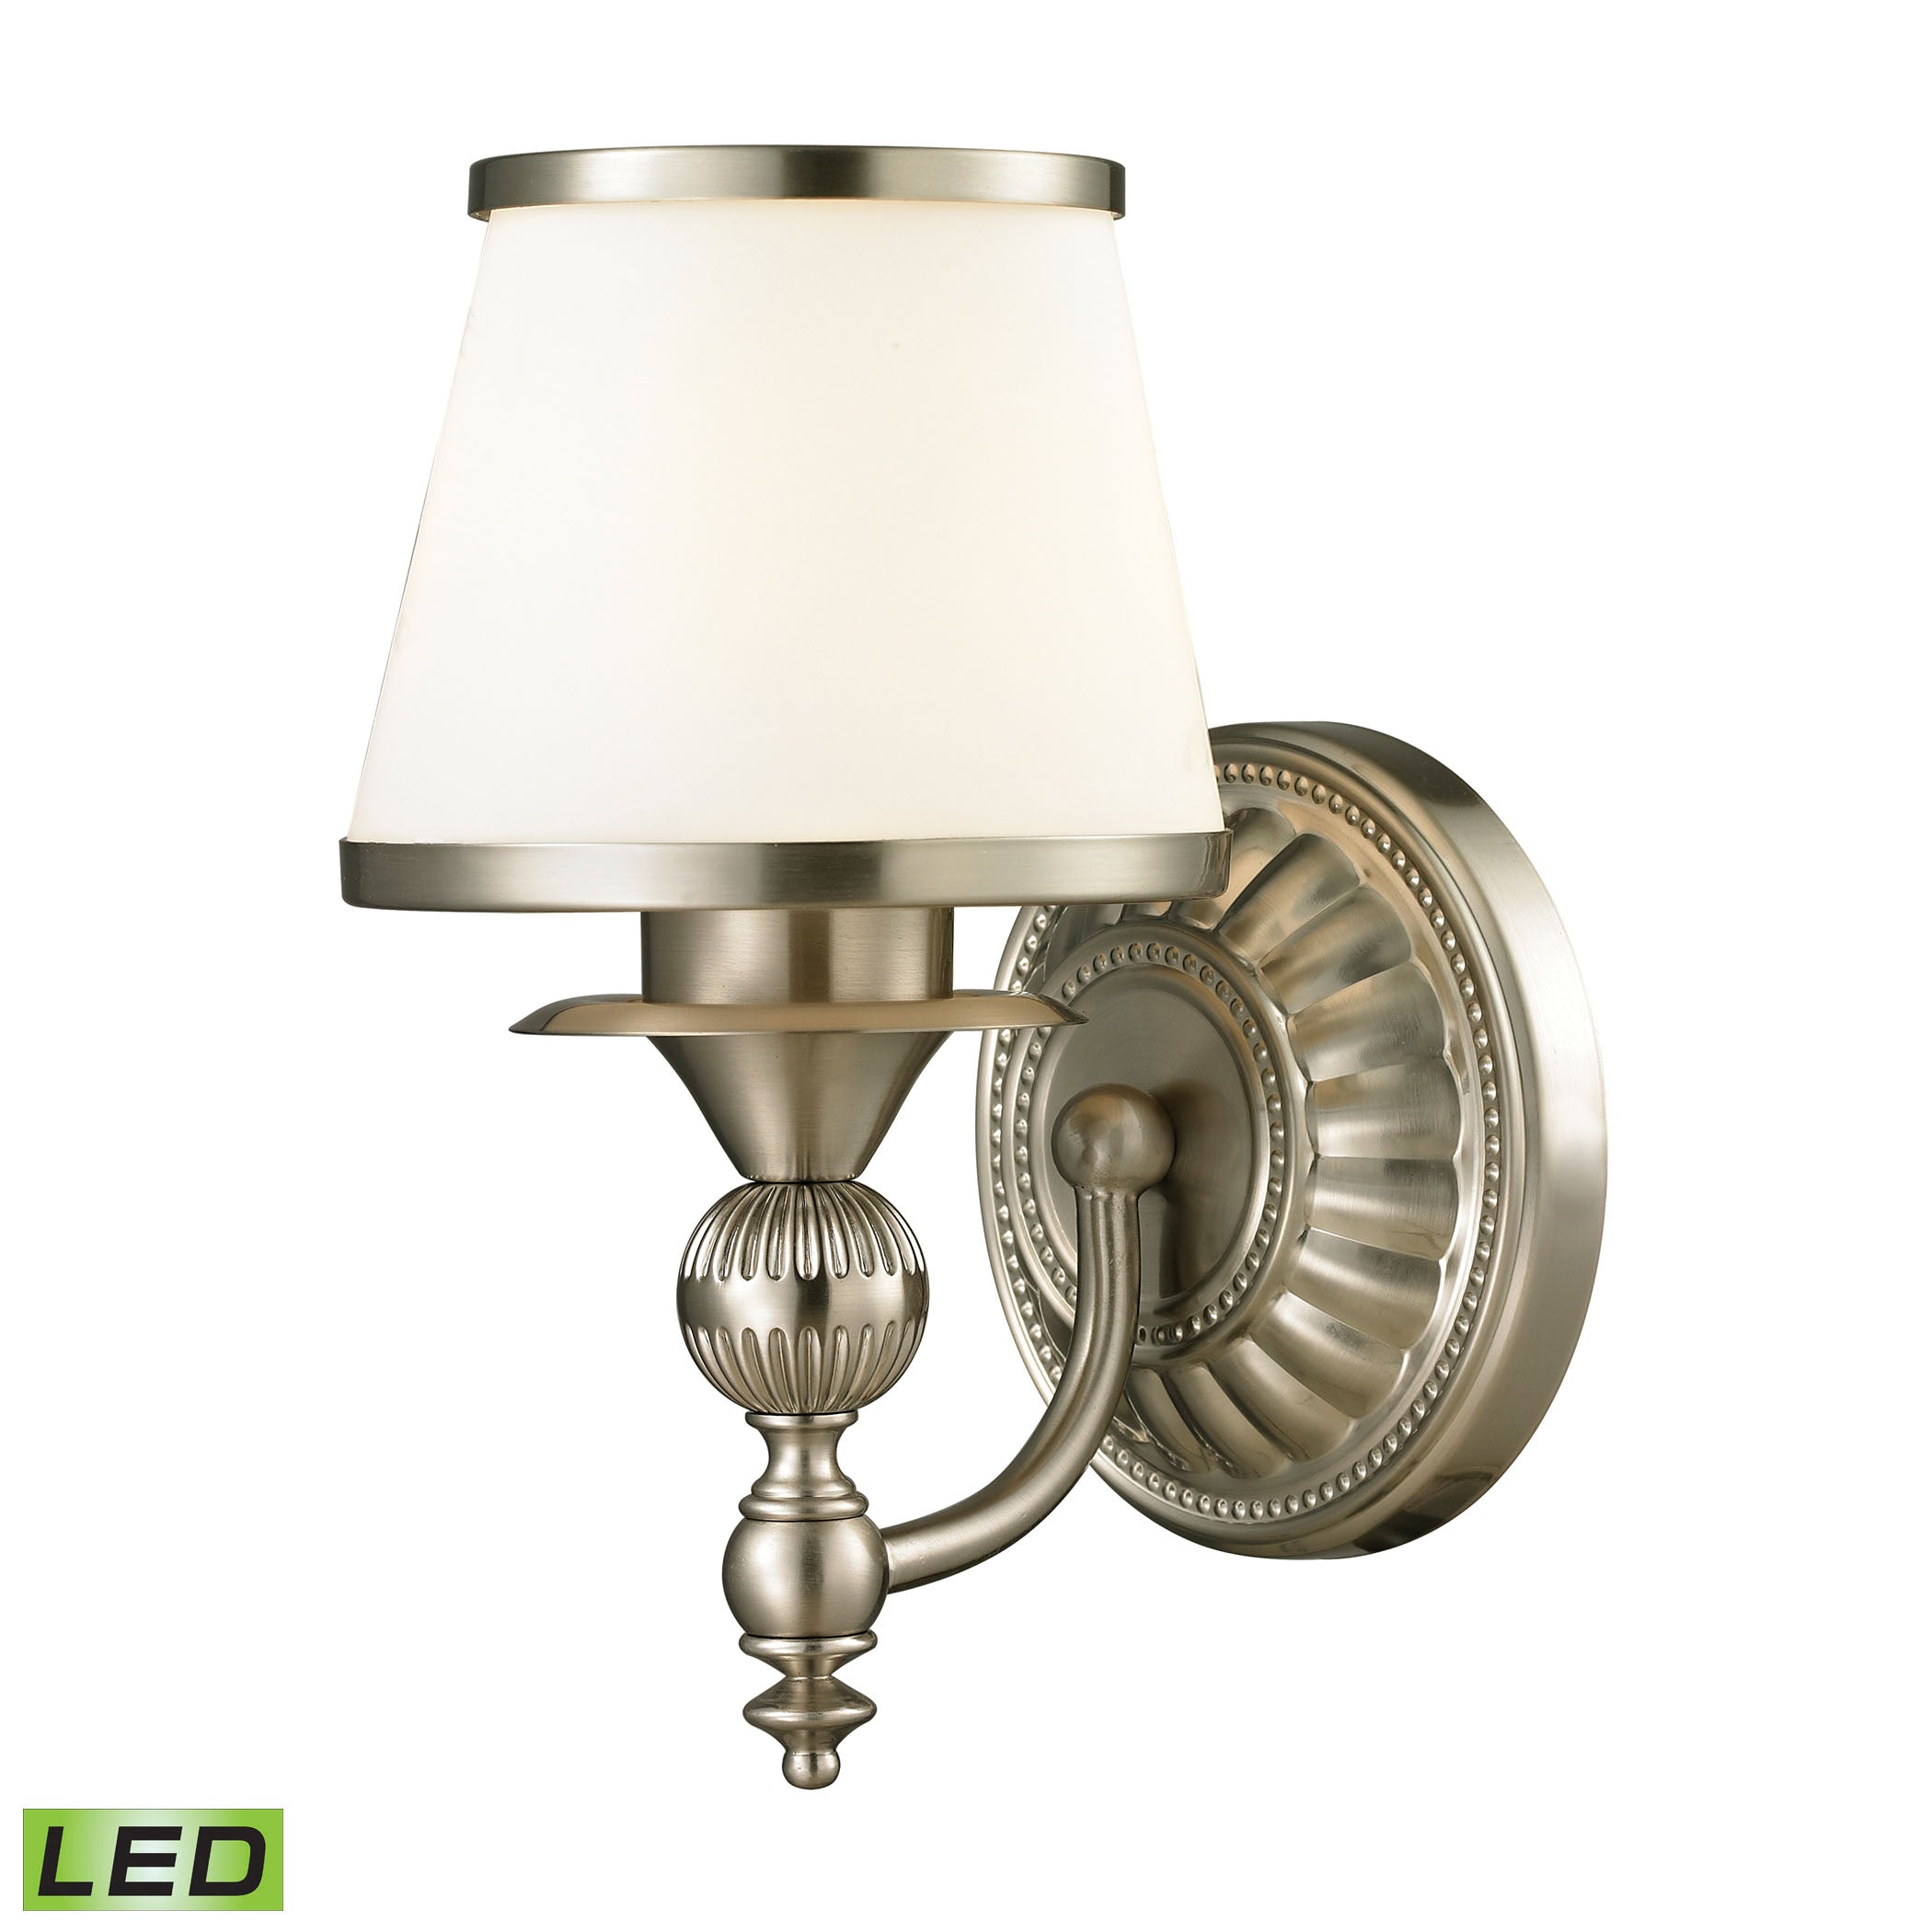 ELK Lighting 11600/1-LED Smithfield 1-Light Vanity Lamp in Brushed Nickel with Opal White Blown Glass - Includes LED Bulb